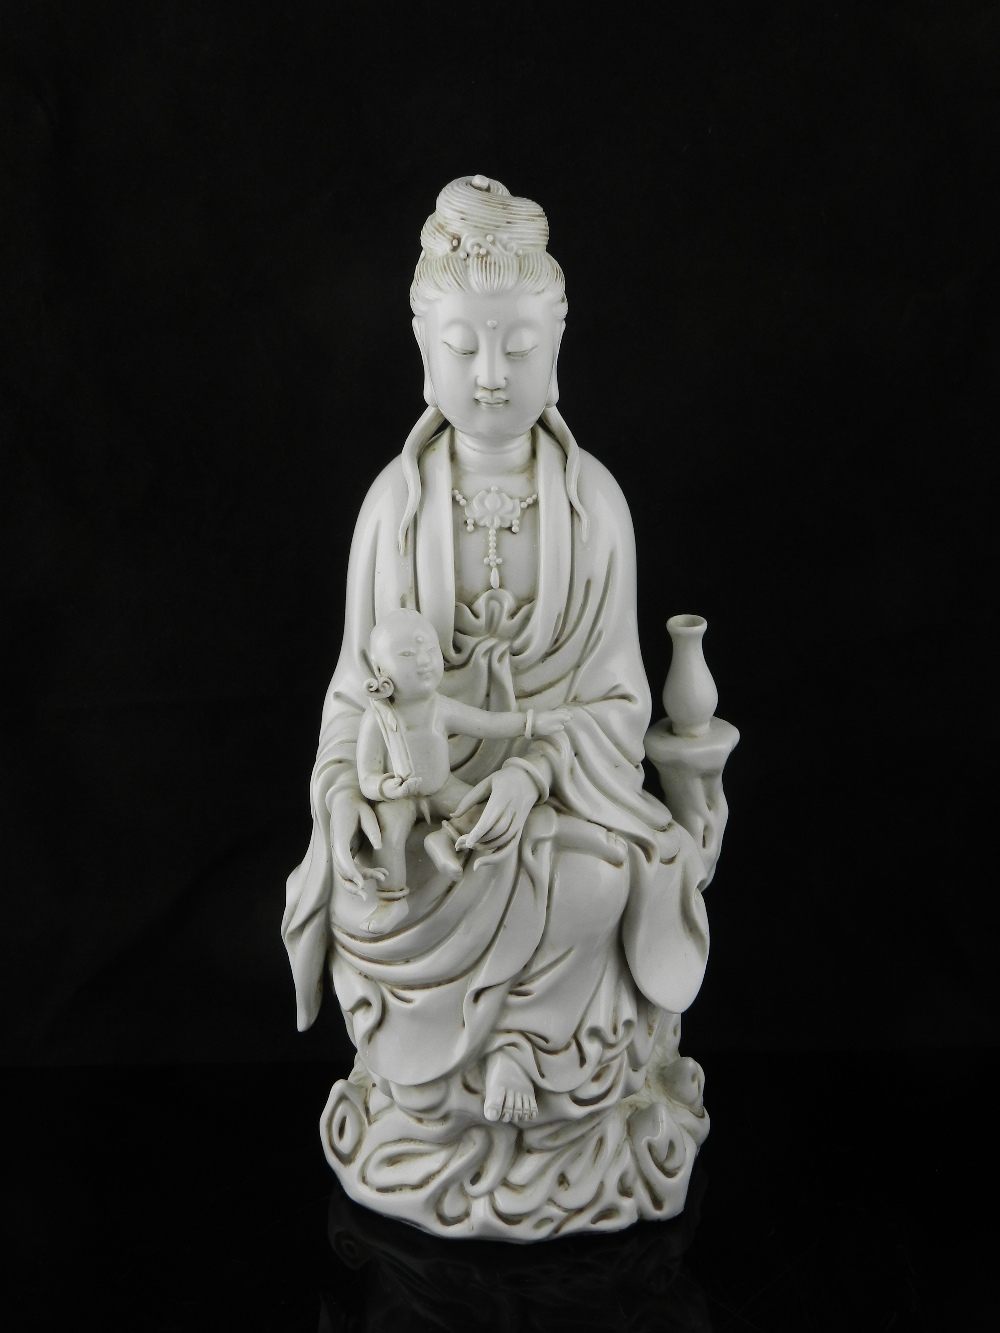 A Chinese blanc de chine porcelain model of Guan Yin with child.